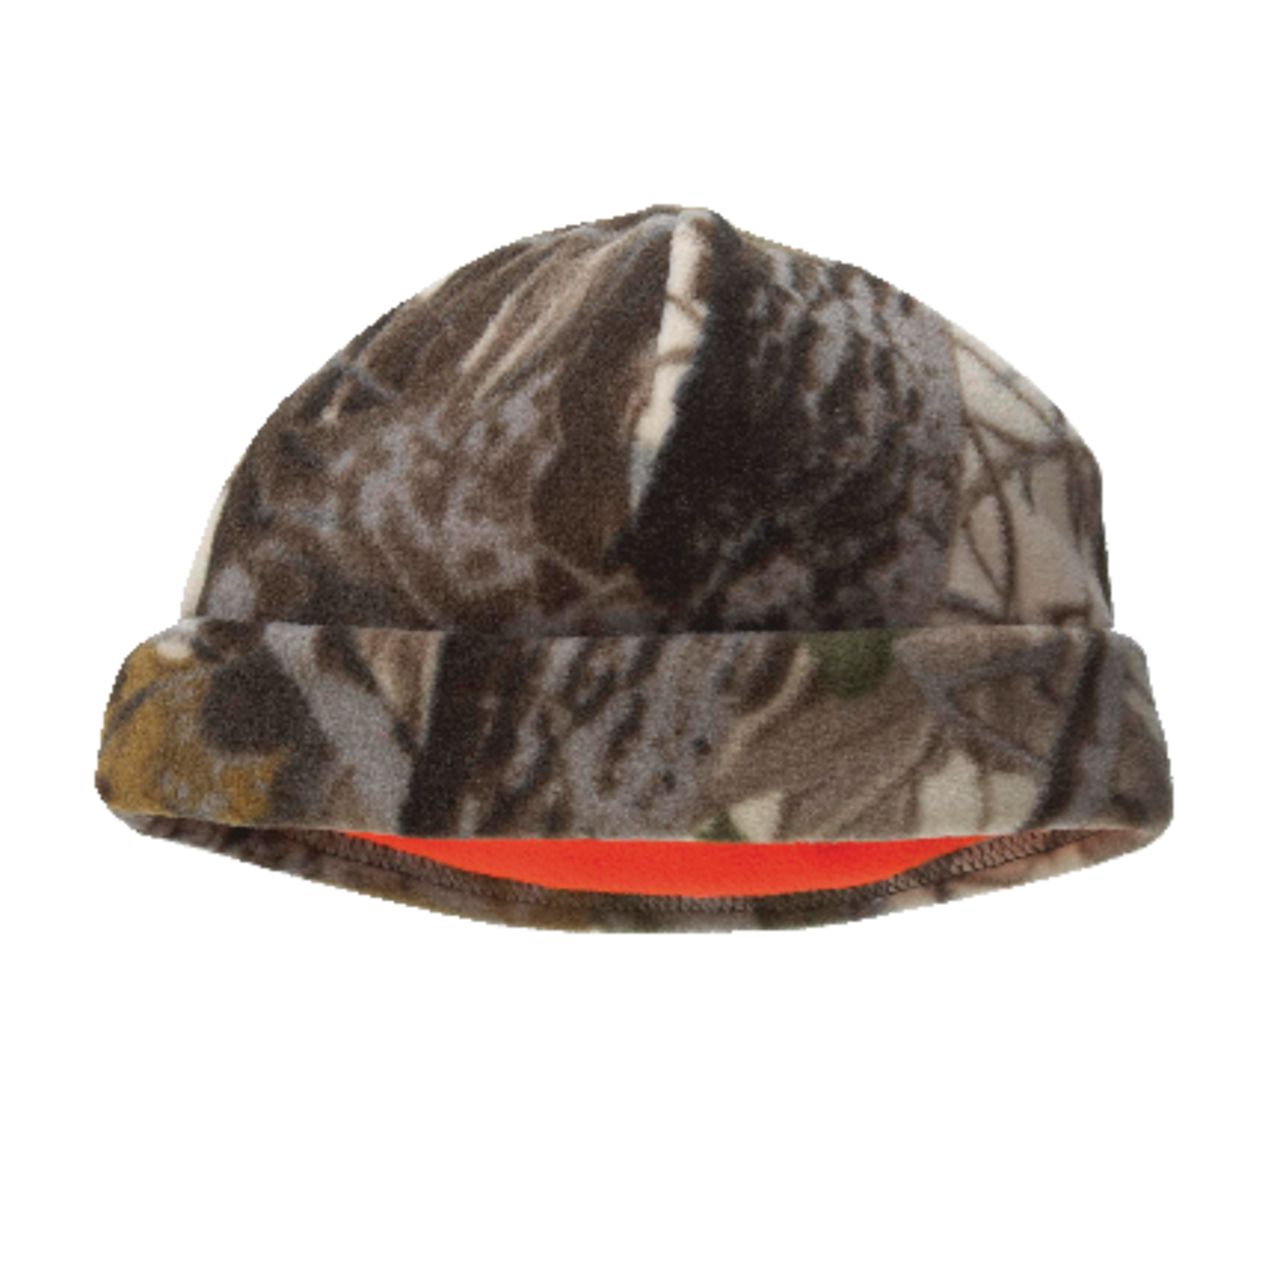 https://media-www.canadiantire.ca/product/playing/hunting/hunting-apparel-footwear/0753444/reversible-fleece-toque-camo-to-blaze-orange-e5a7bdbf-4822-430f-b187-4a136a2c2045.png?imdensity=1&imwidth=640&impolicy=mZoom